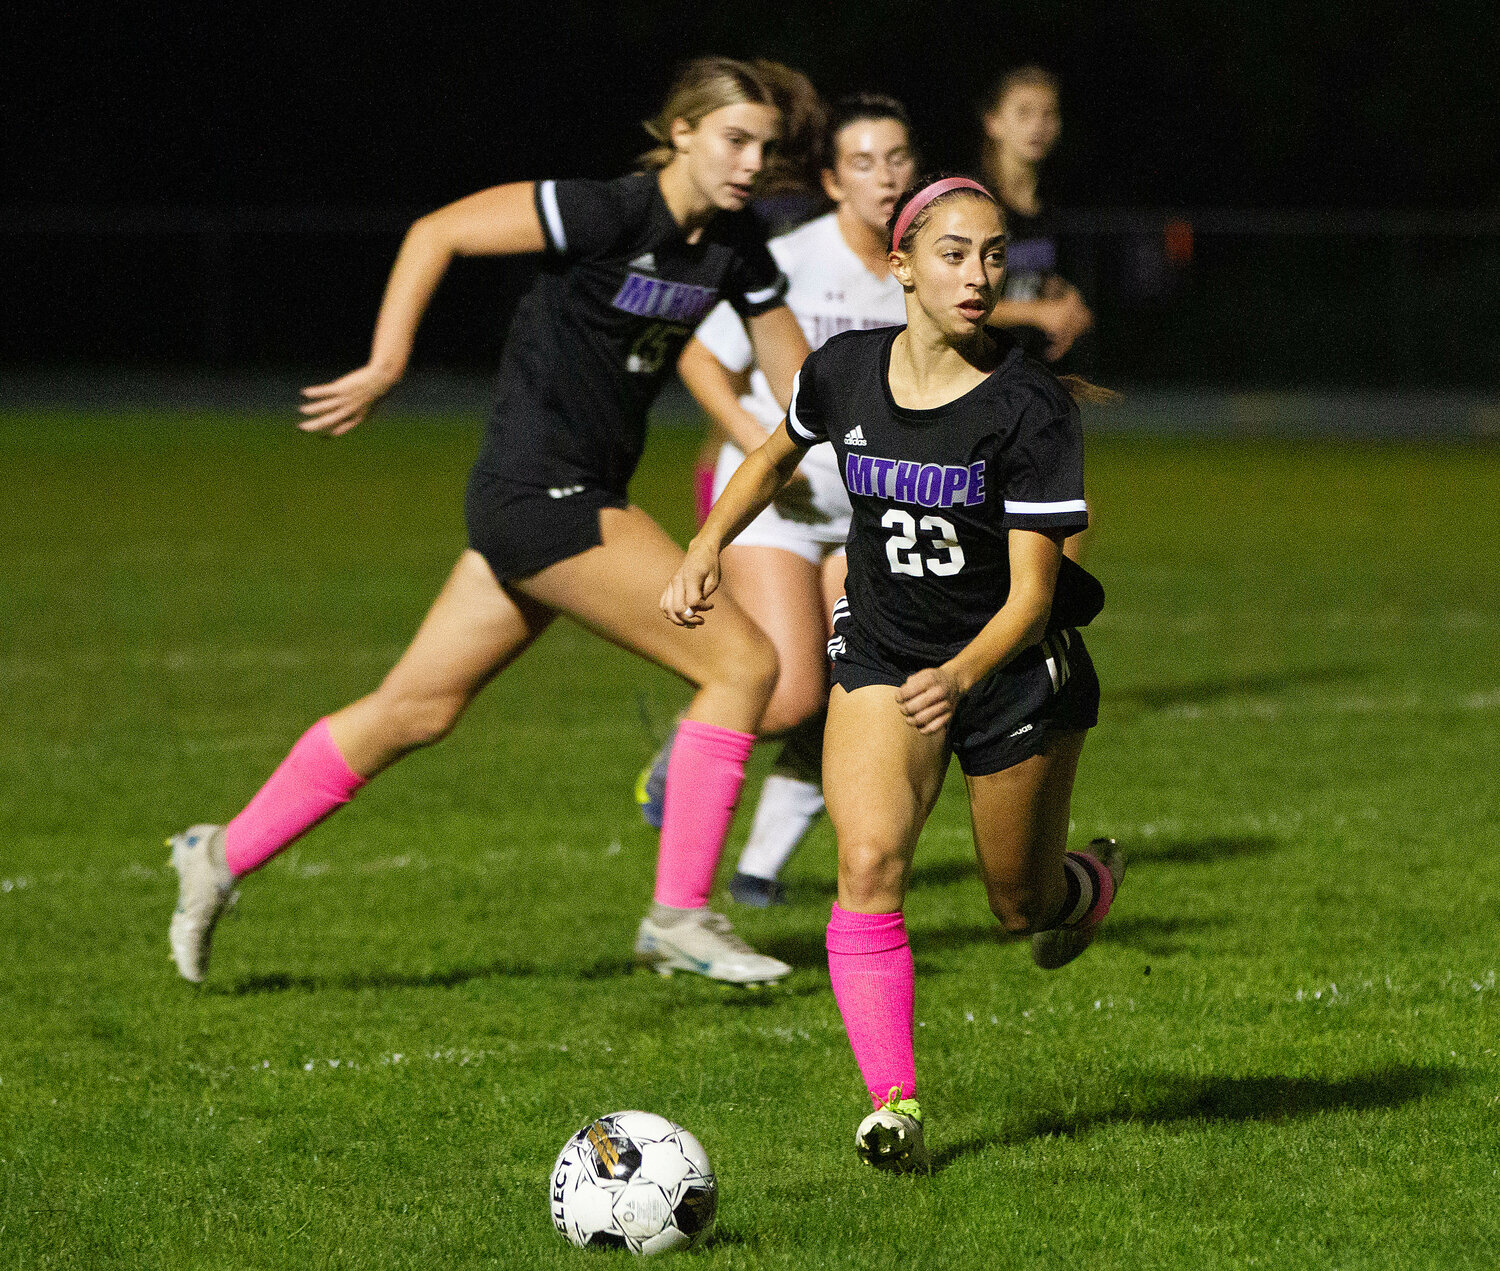 Hannah Rezendes looks upfield to make a pass during the Huskies win over East Greenwich. 